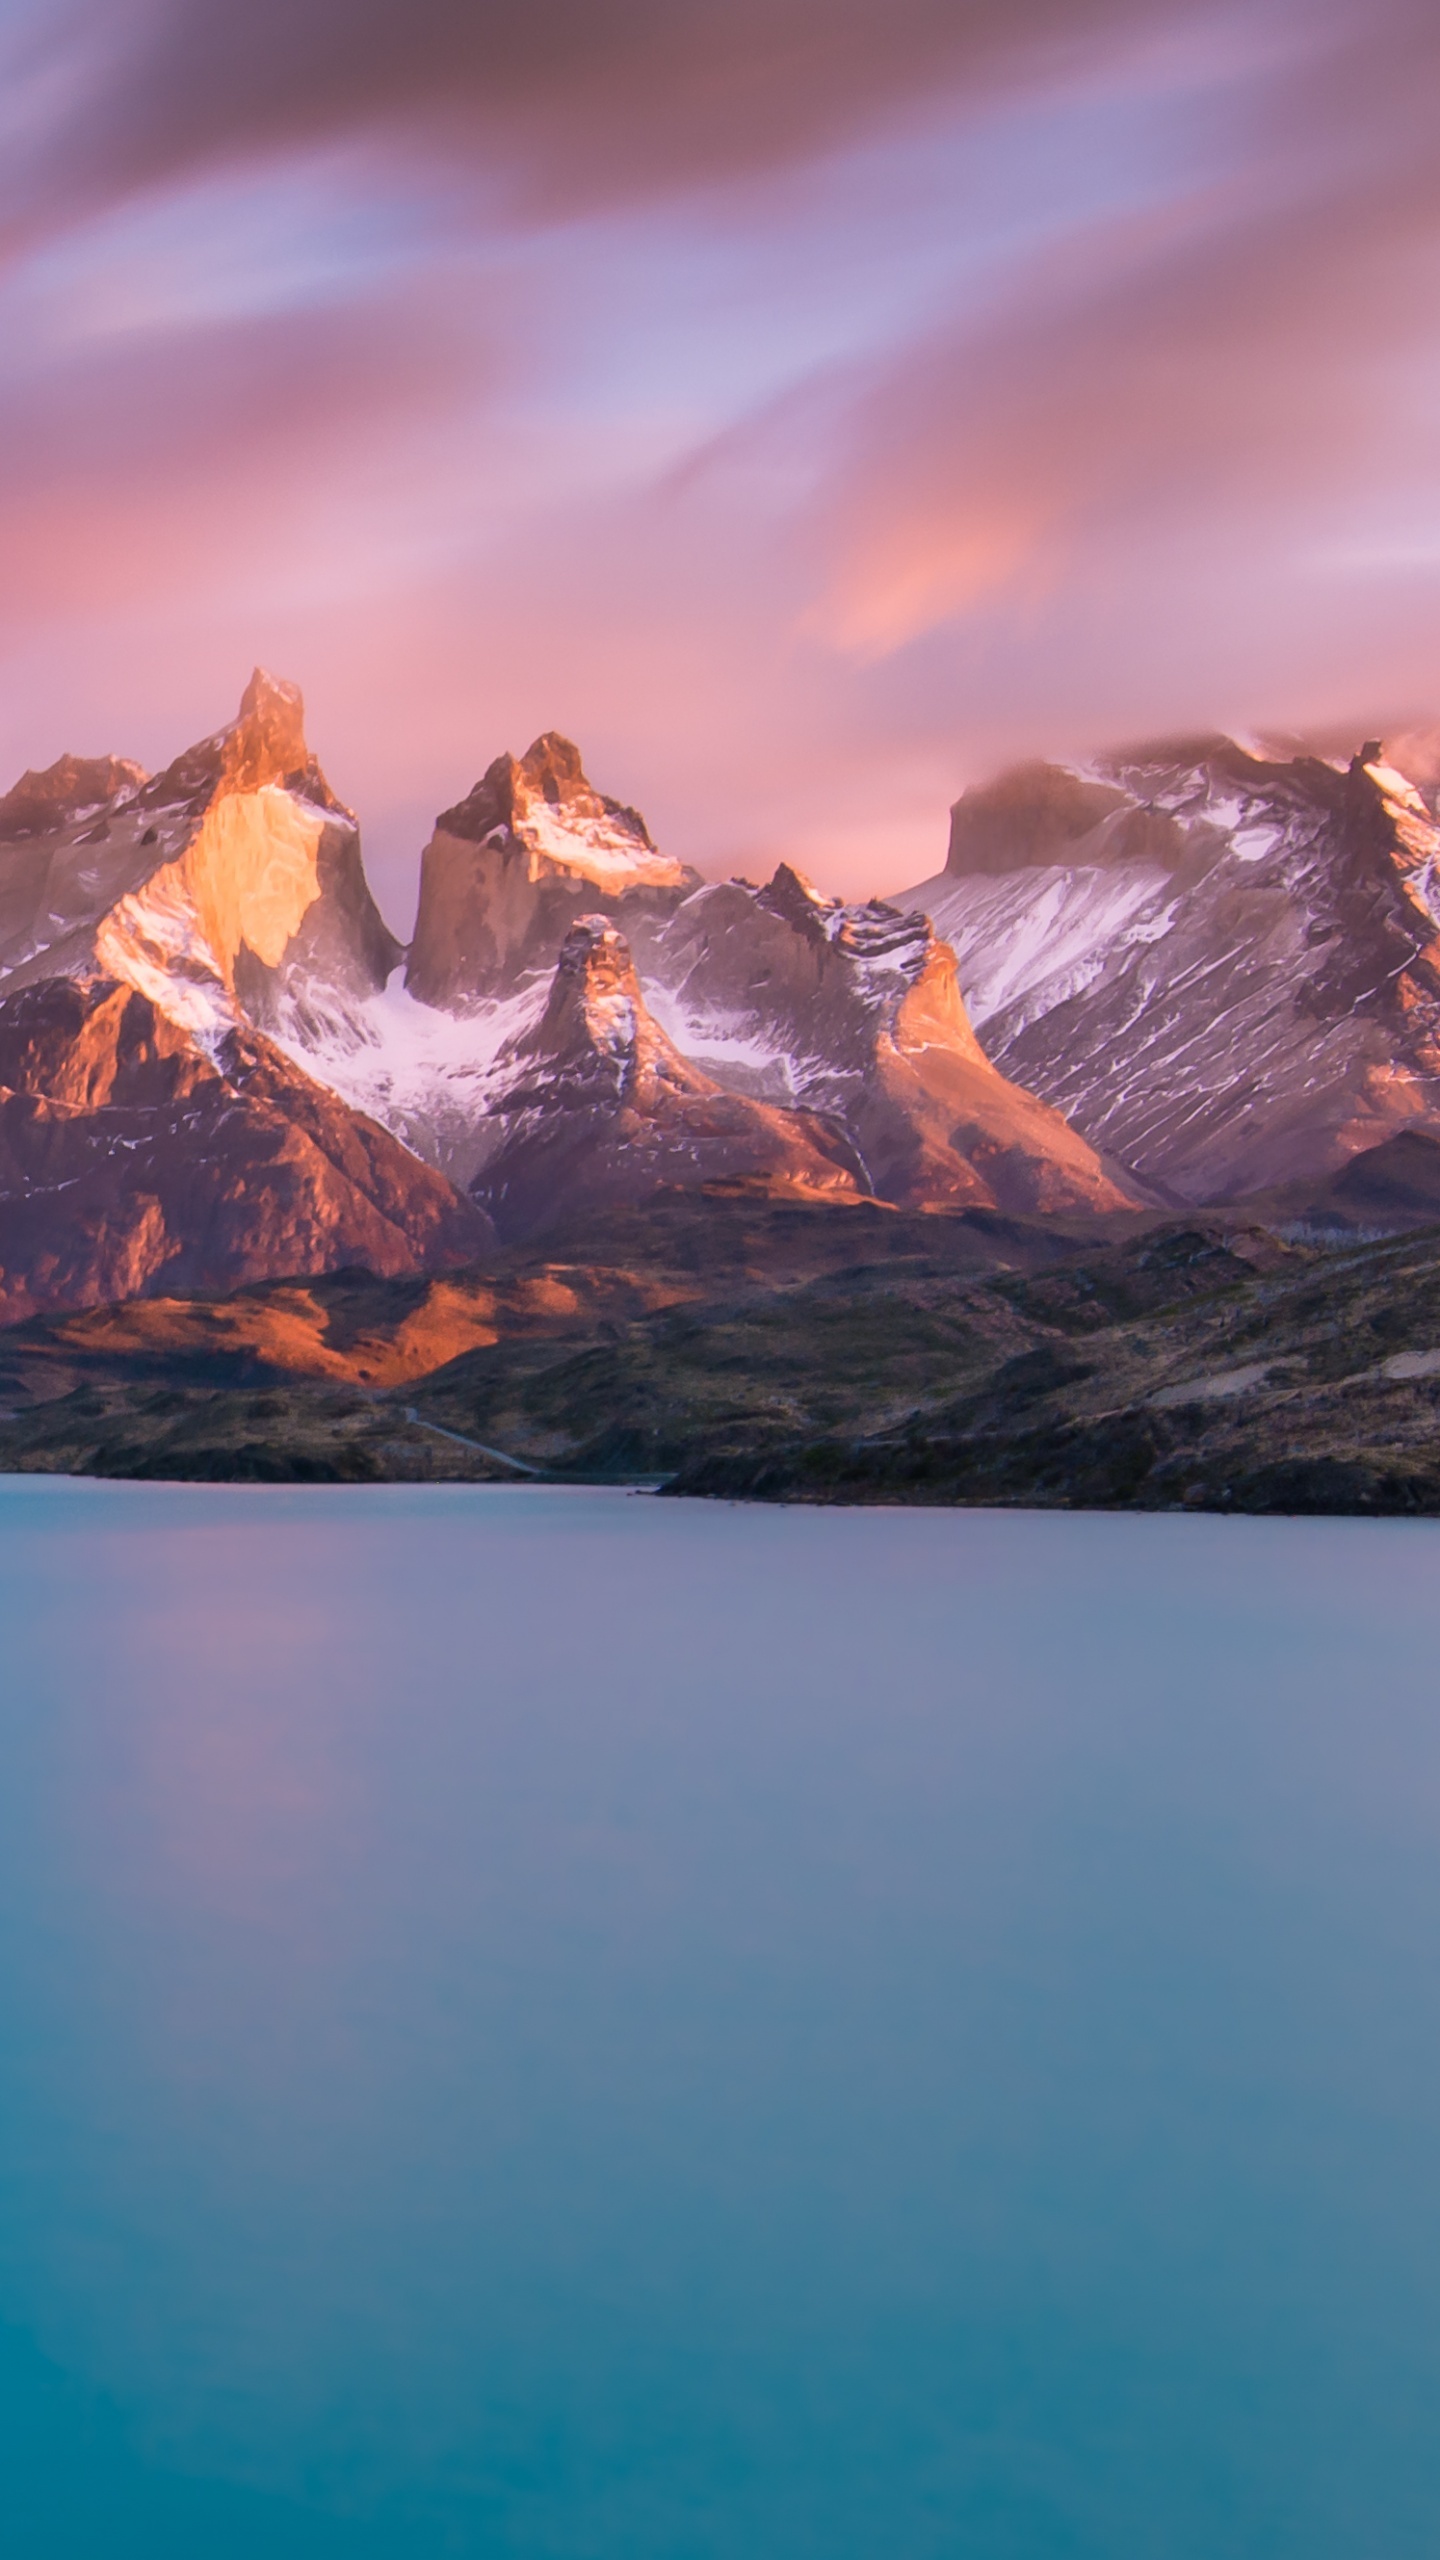 Chile: A long, narrow country lying between the Andes Mountains and the Pacific Ocean. 1440x2560 HD Wallpaper.